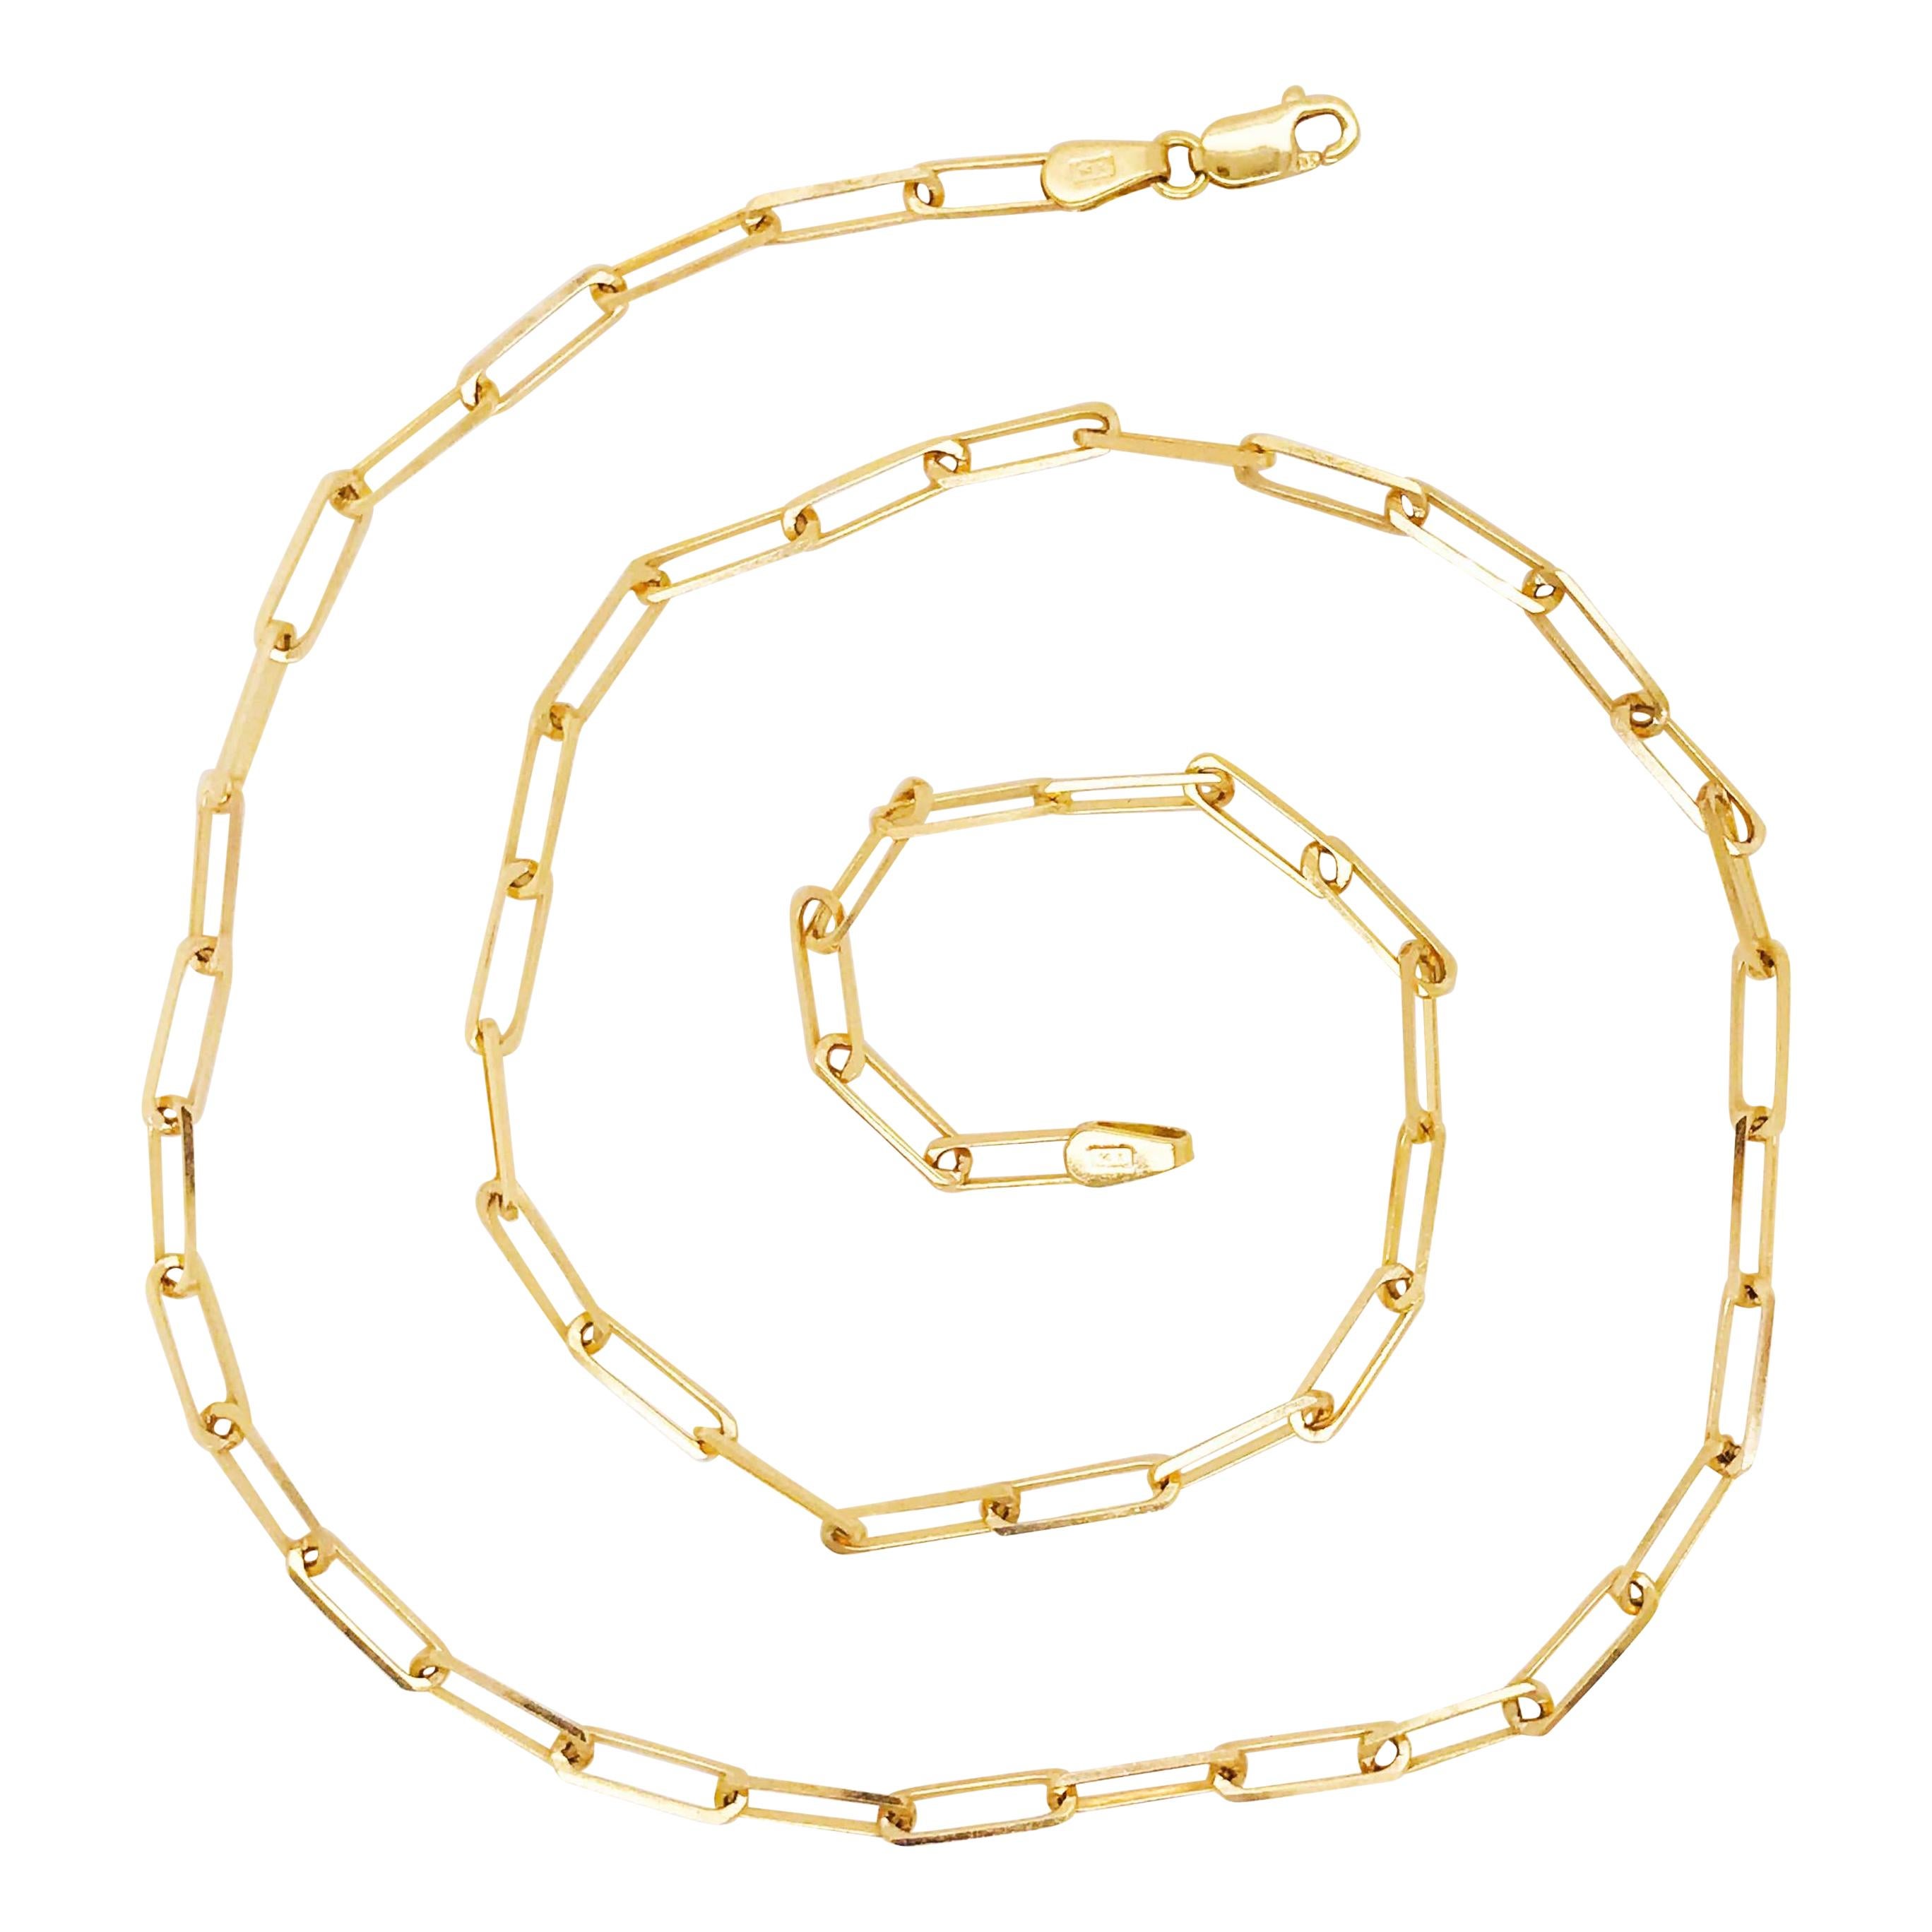 Paperclip Link Chain Necklace in 14 Karat Yellow Gold, 14 Karat Paperclip